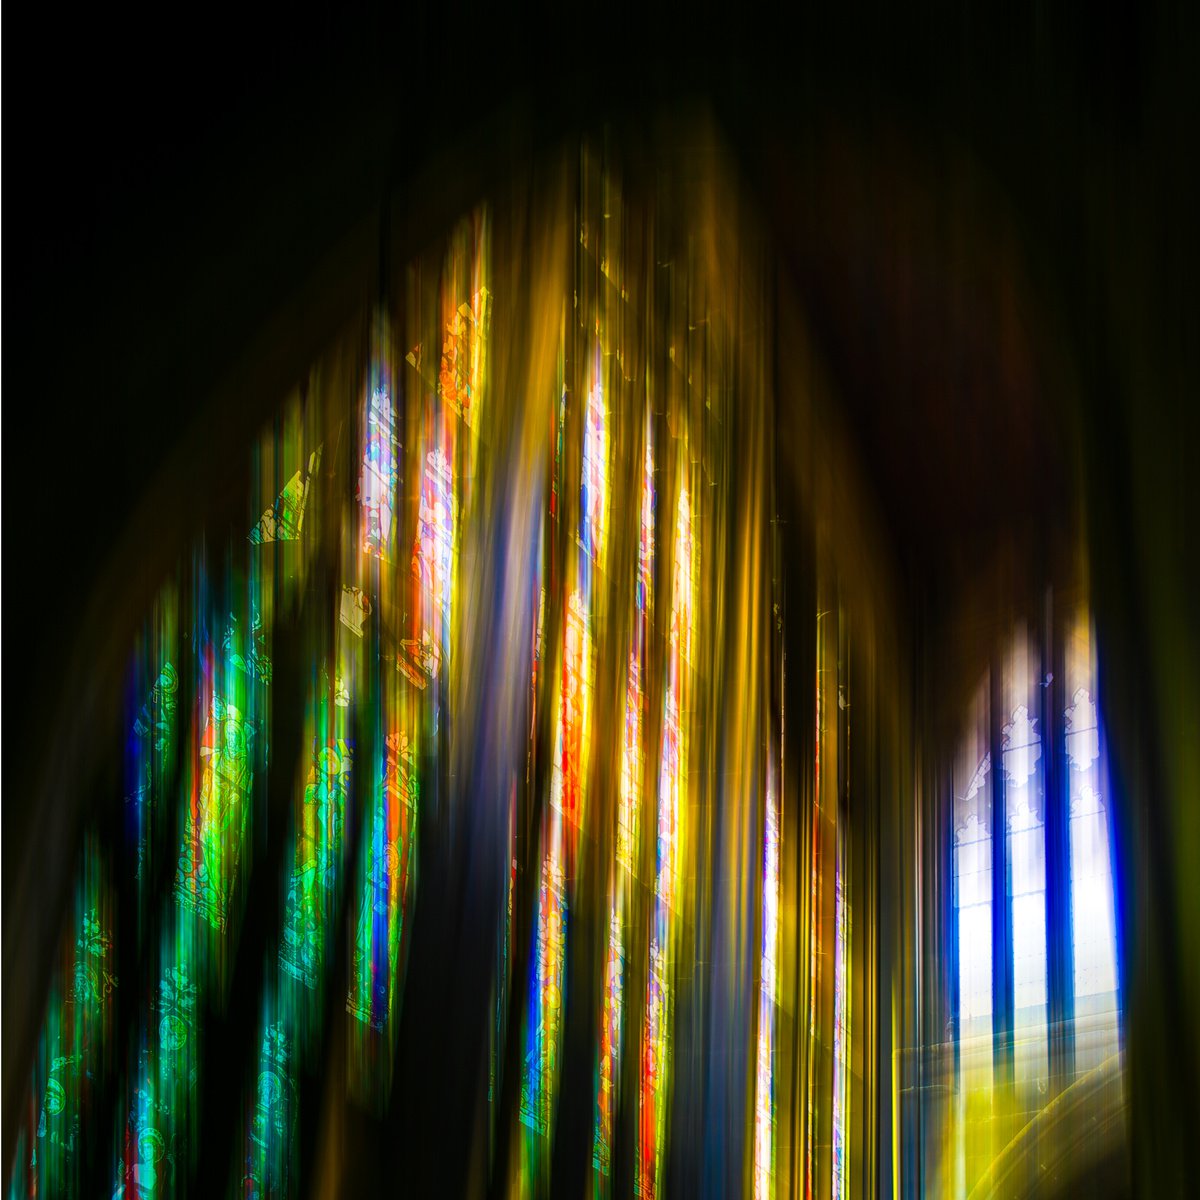 Stained Religion Limited Edition Abstract Church Window #2/50 10x10 inch Photographic Prin... by Graham Briggs